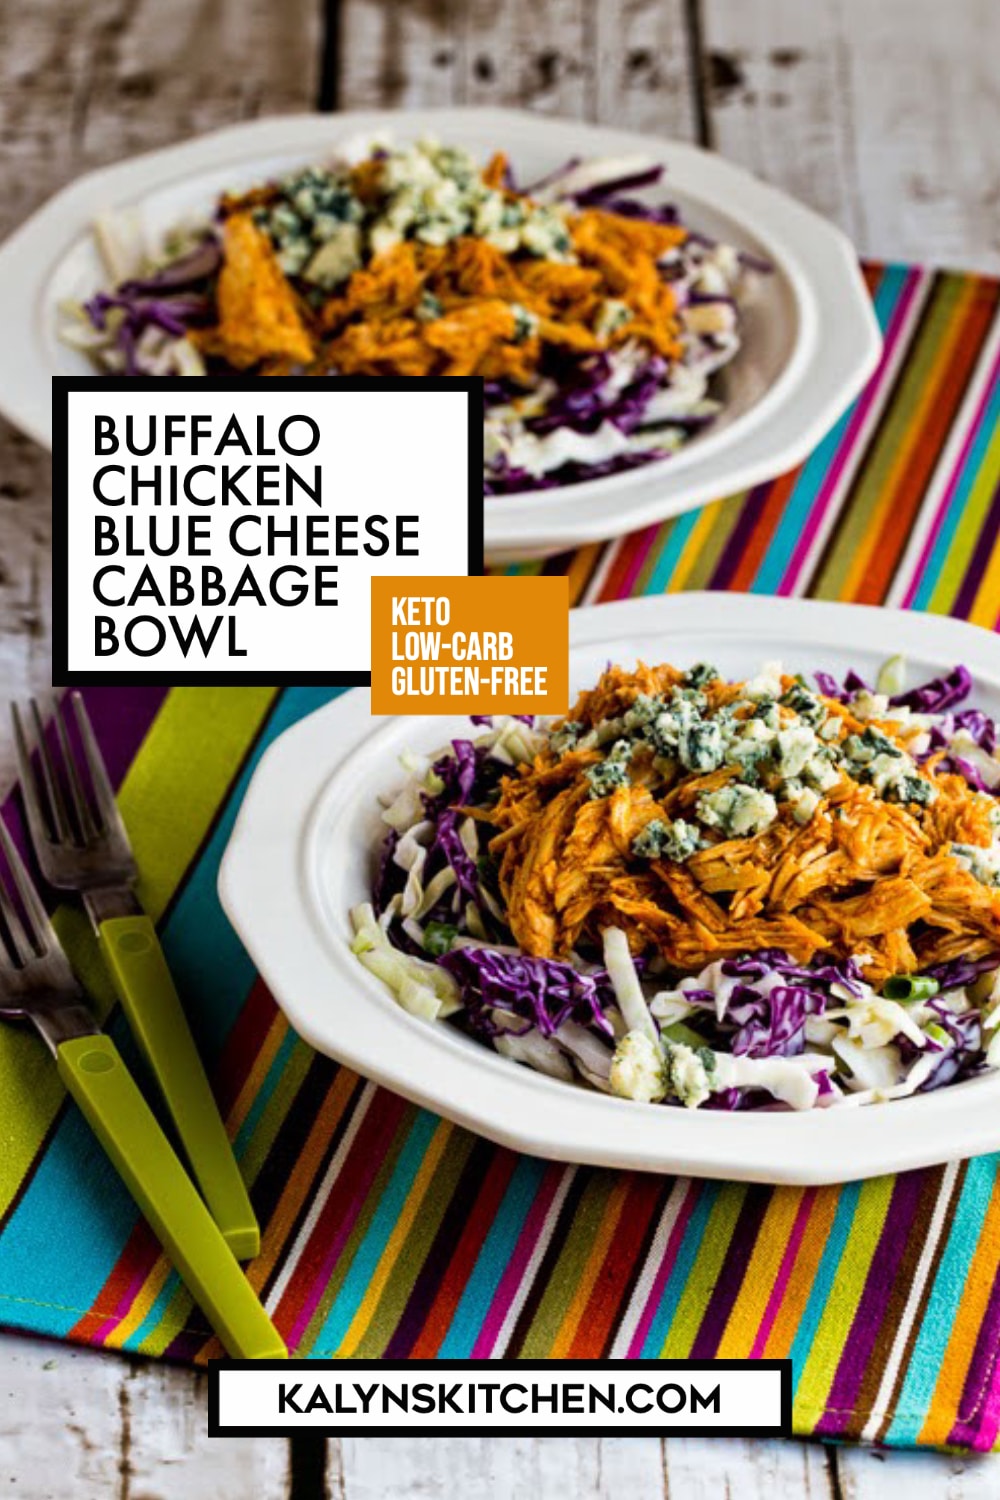 Pinterest image of Buffalo Chicken Blue Cheese Cabbage Bowl